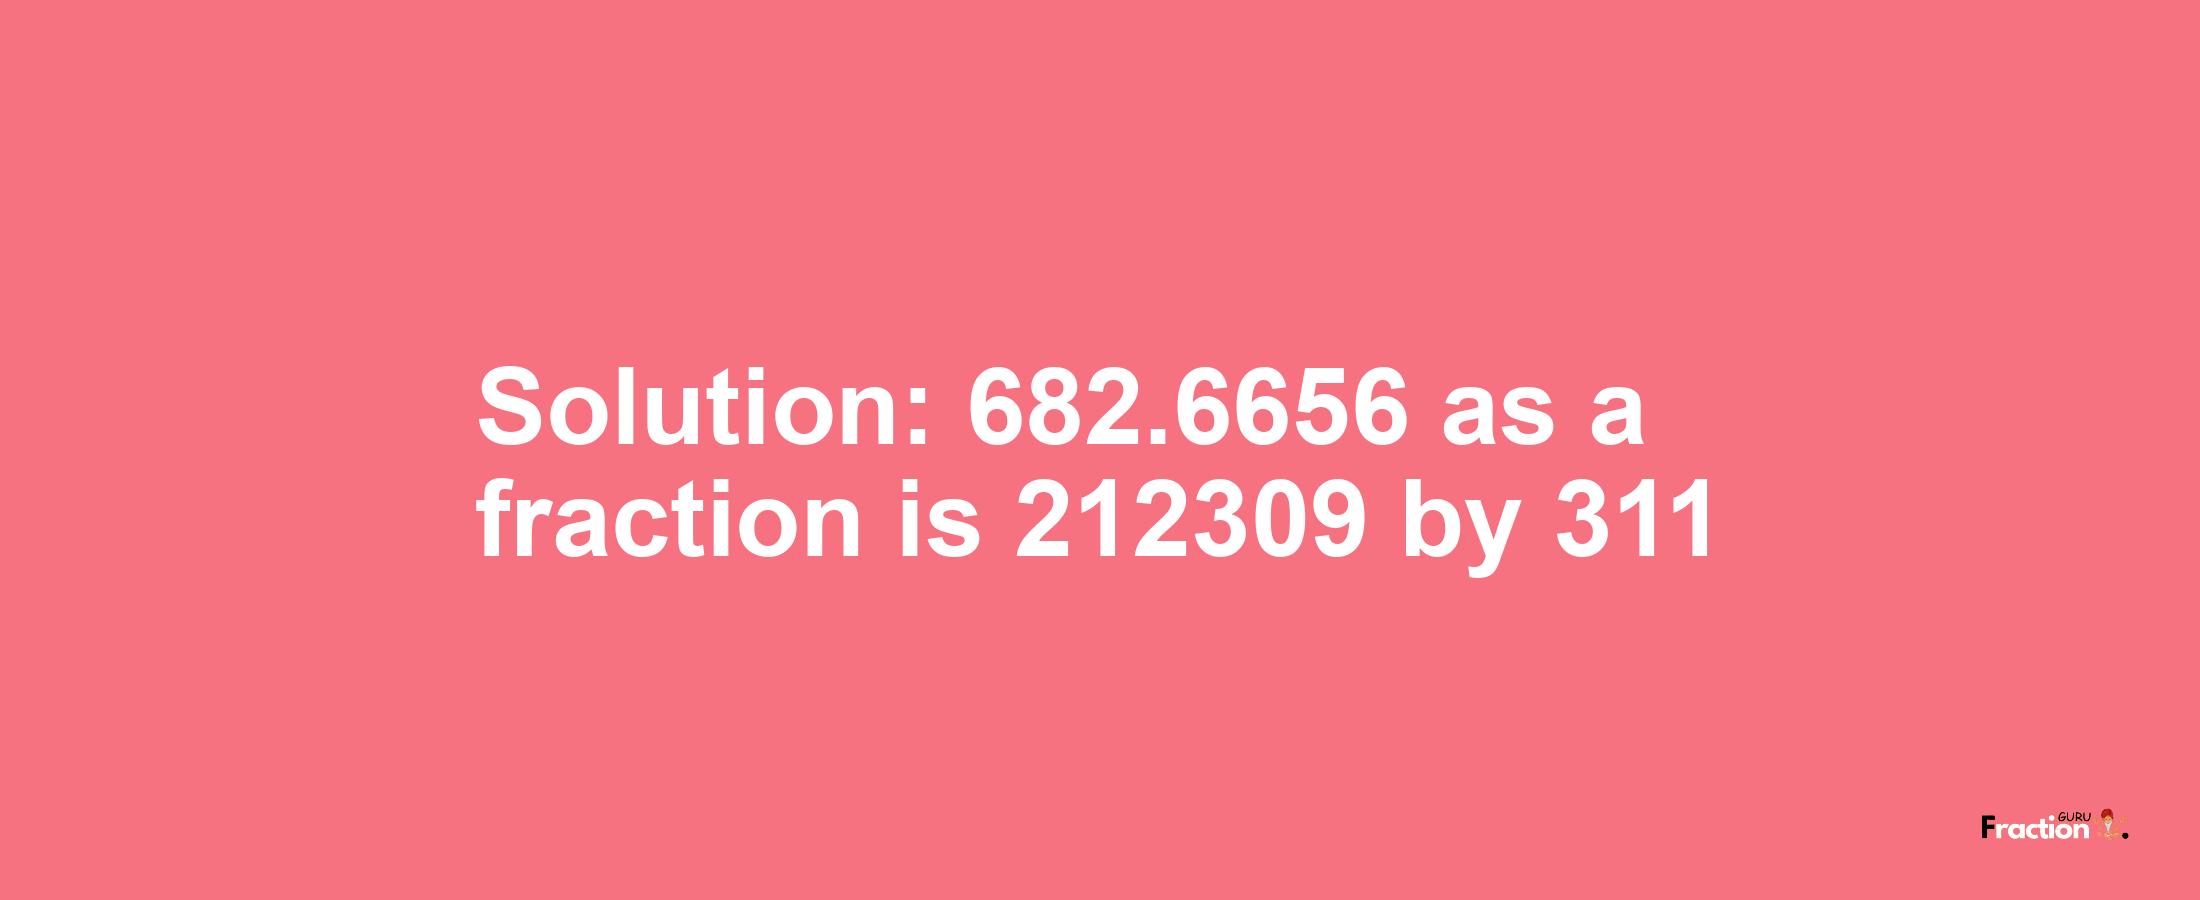 Solution:682.6656 as a fraction is 212309/311